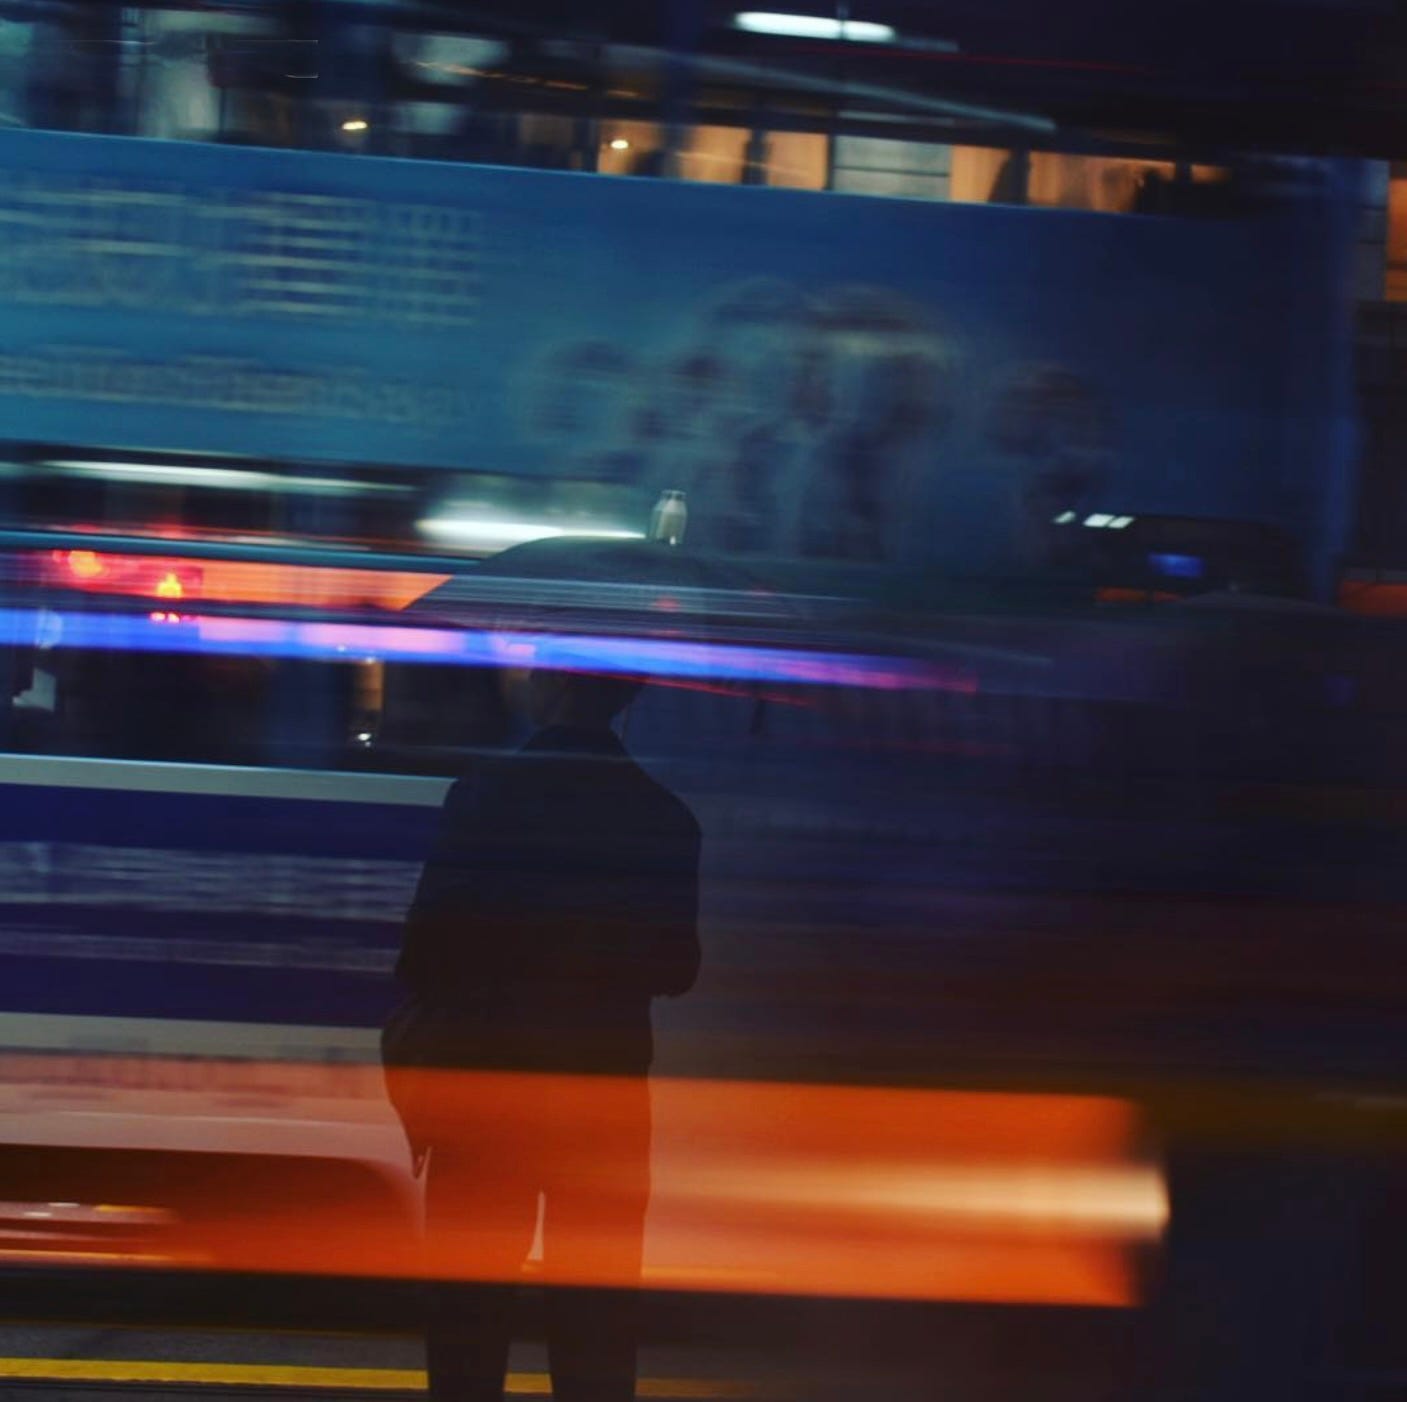 Blurred nighttime photo horizontal lines suggesting motion. Silhouetted person.